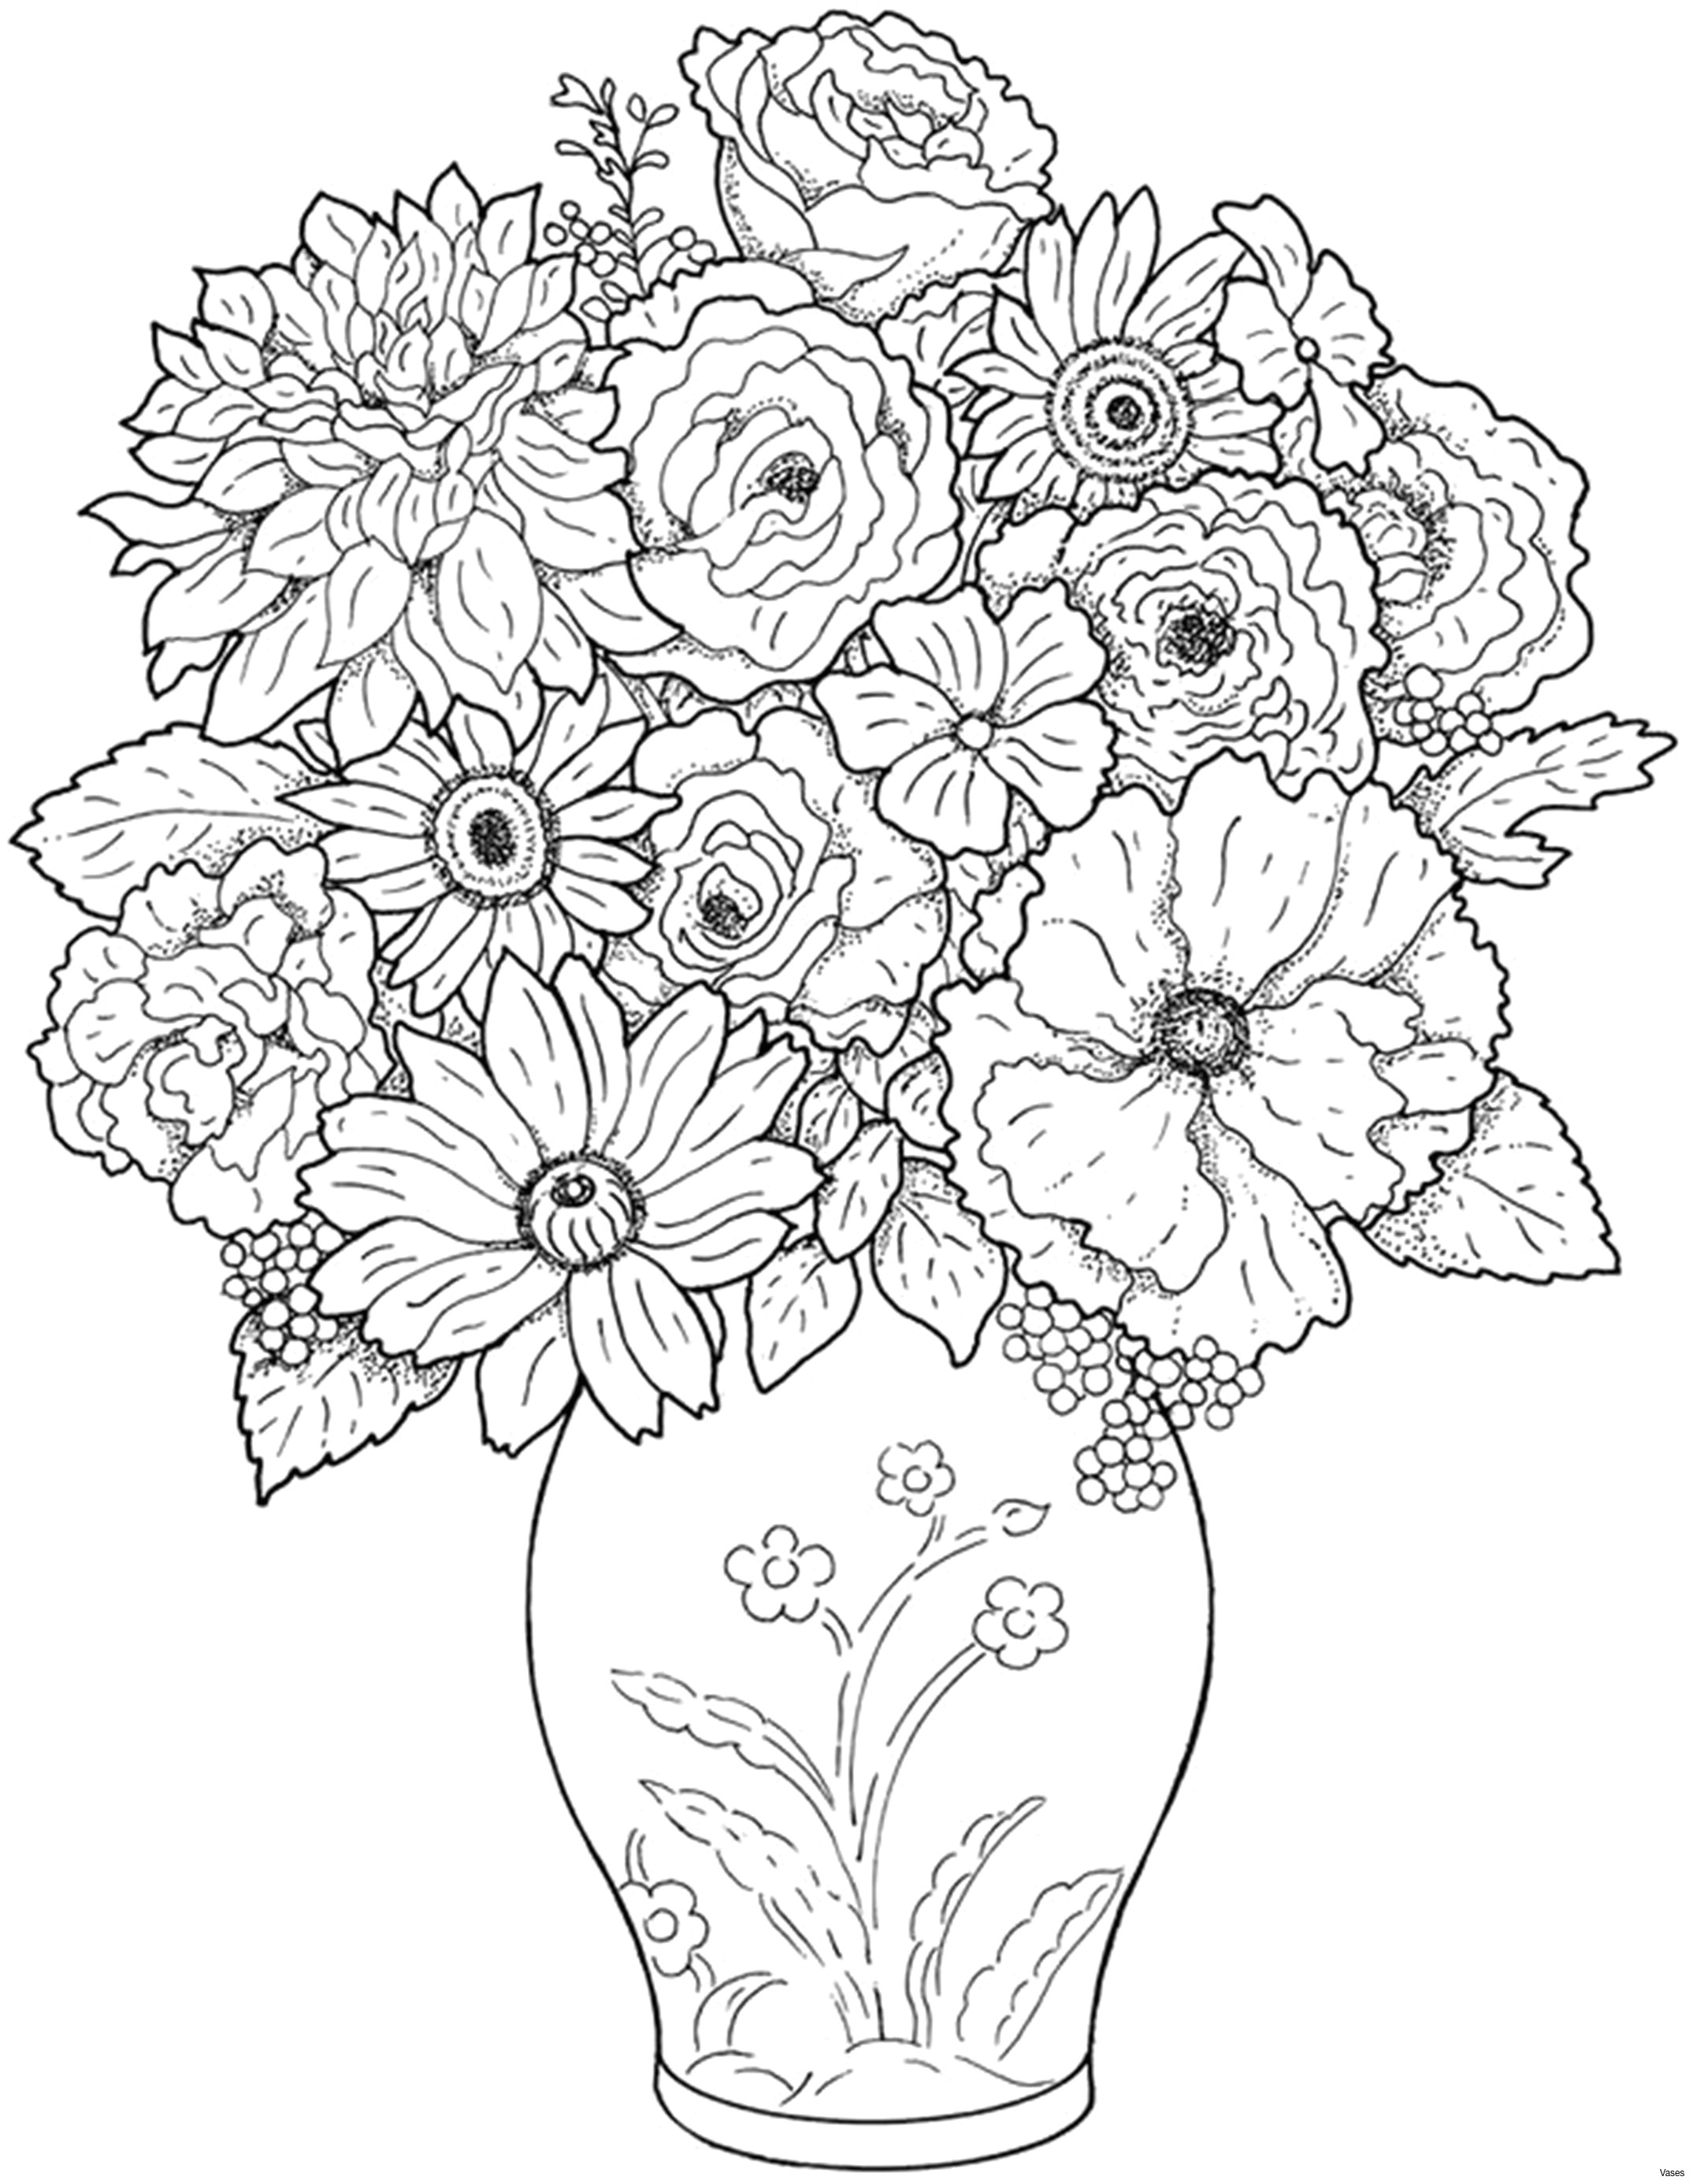 Drawing Of Flowers and Plants Coloring Pictures Of Plants New Cool Vases Flower Vase Coloring Page